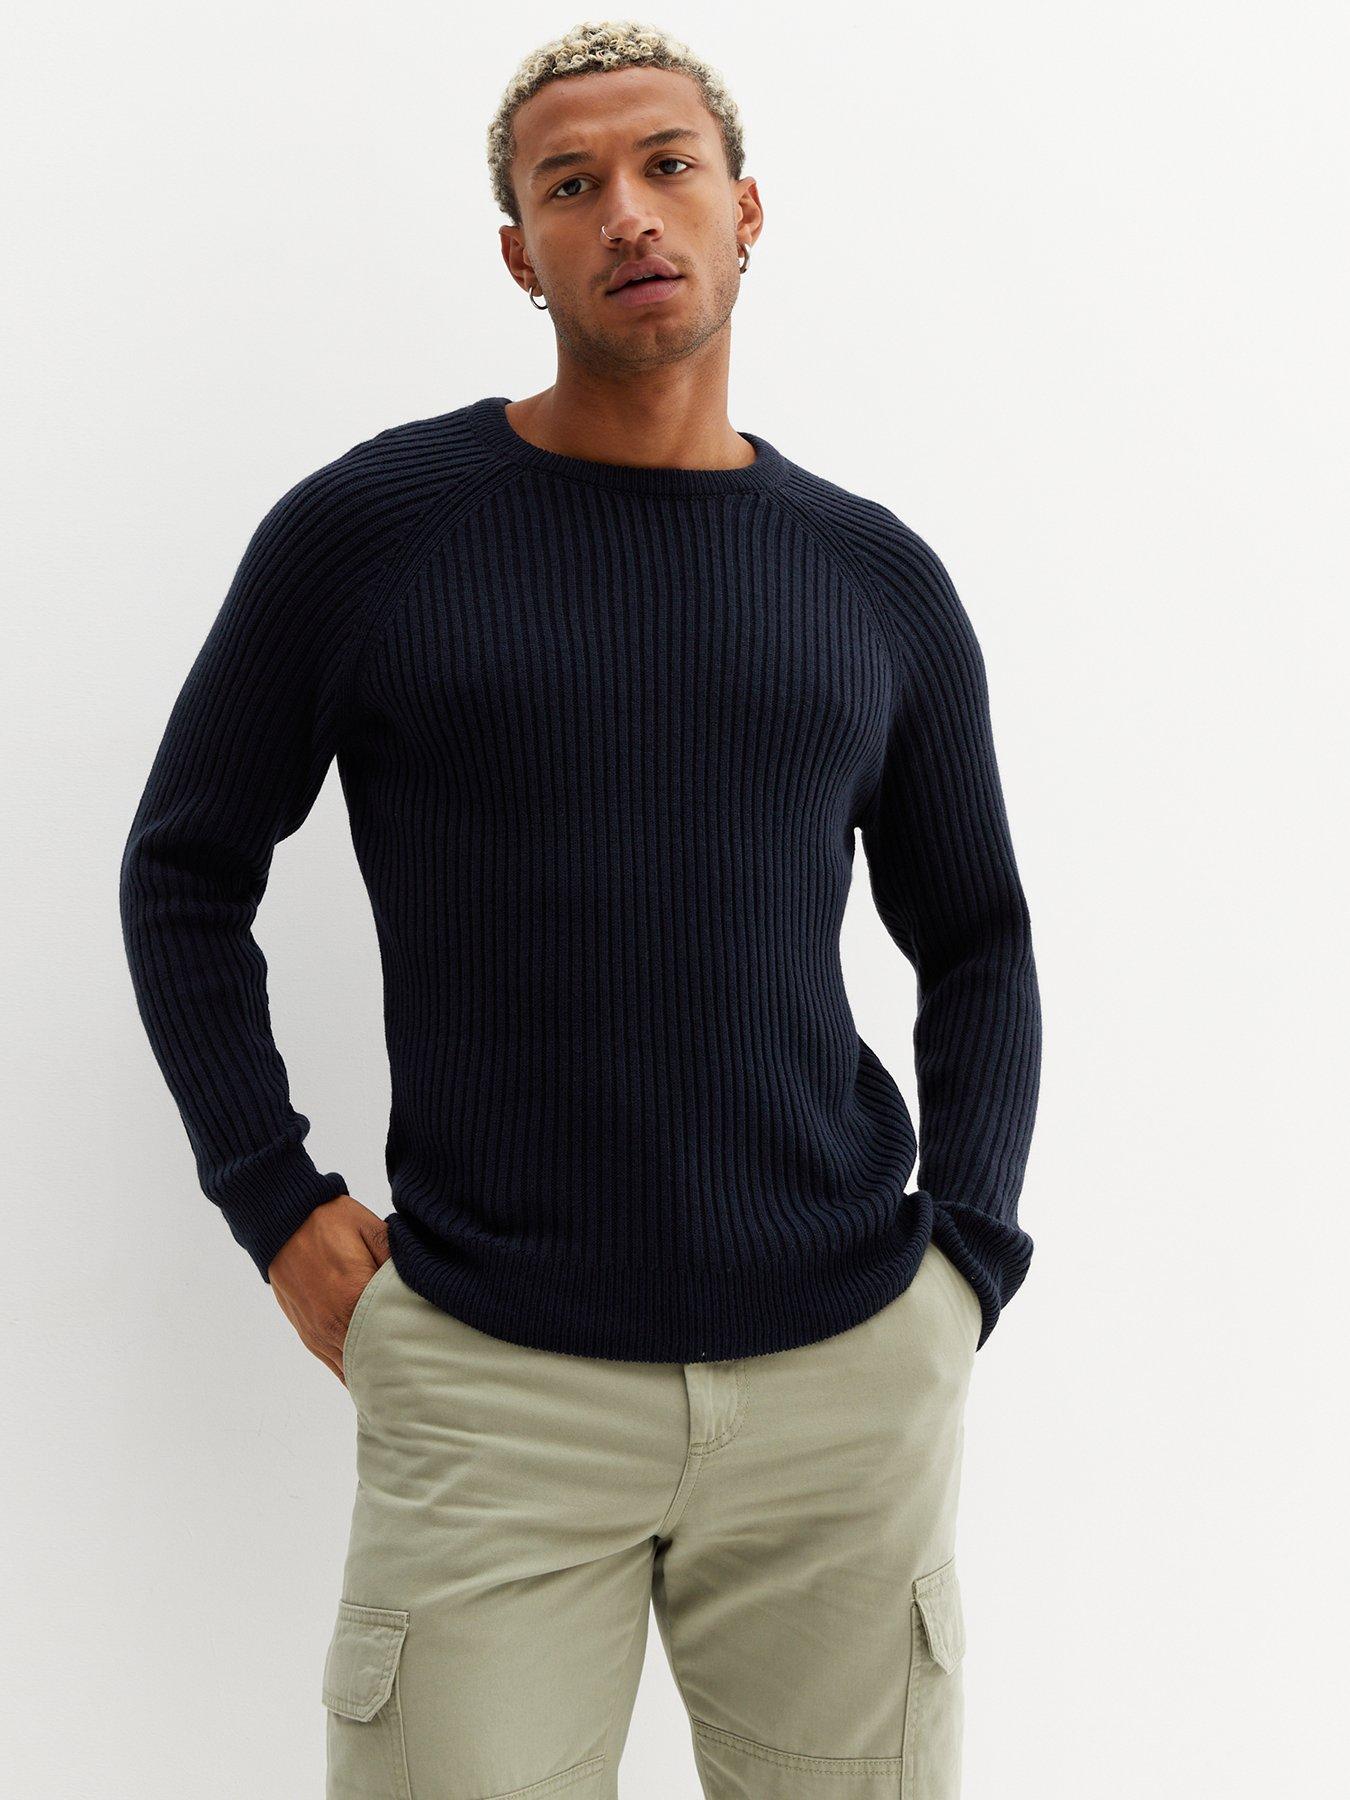 New Look Navy Ribbed Knit Regular Fit Jumper | very.co.uk